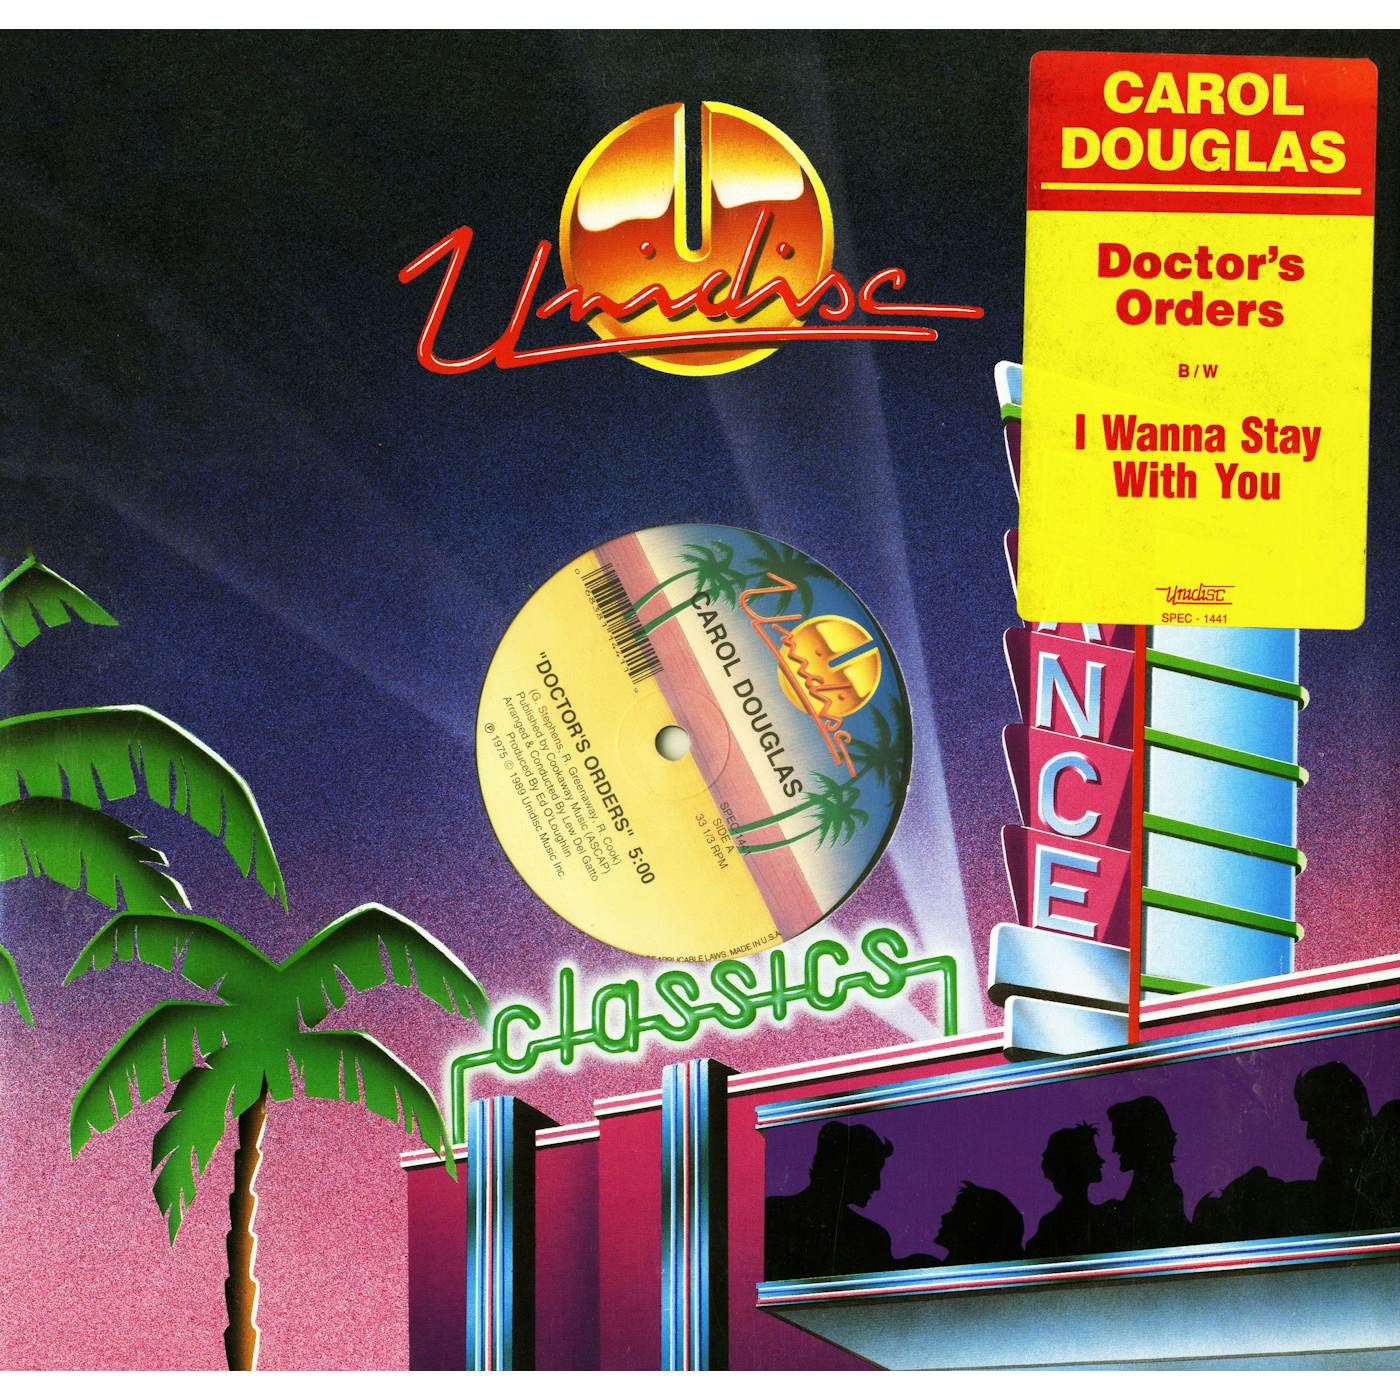 Carol Douglas - Doctor's Orders/I Wanna Stay With You (Vinyl)